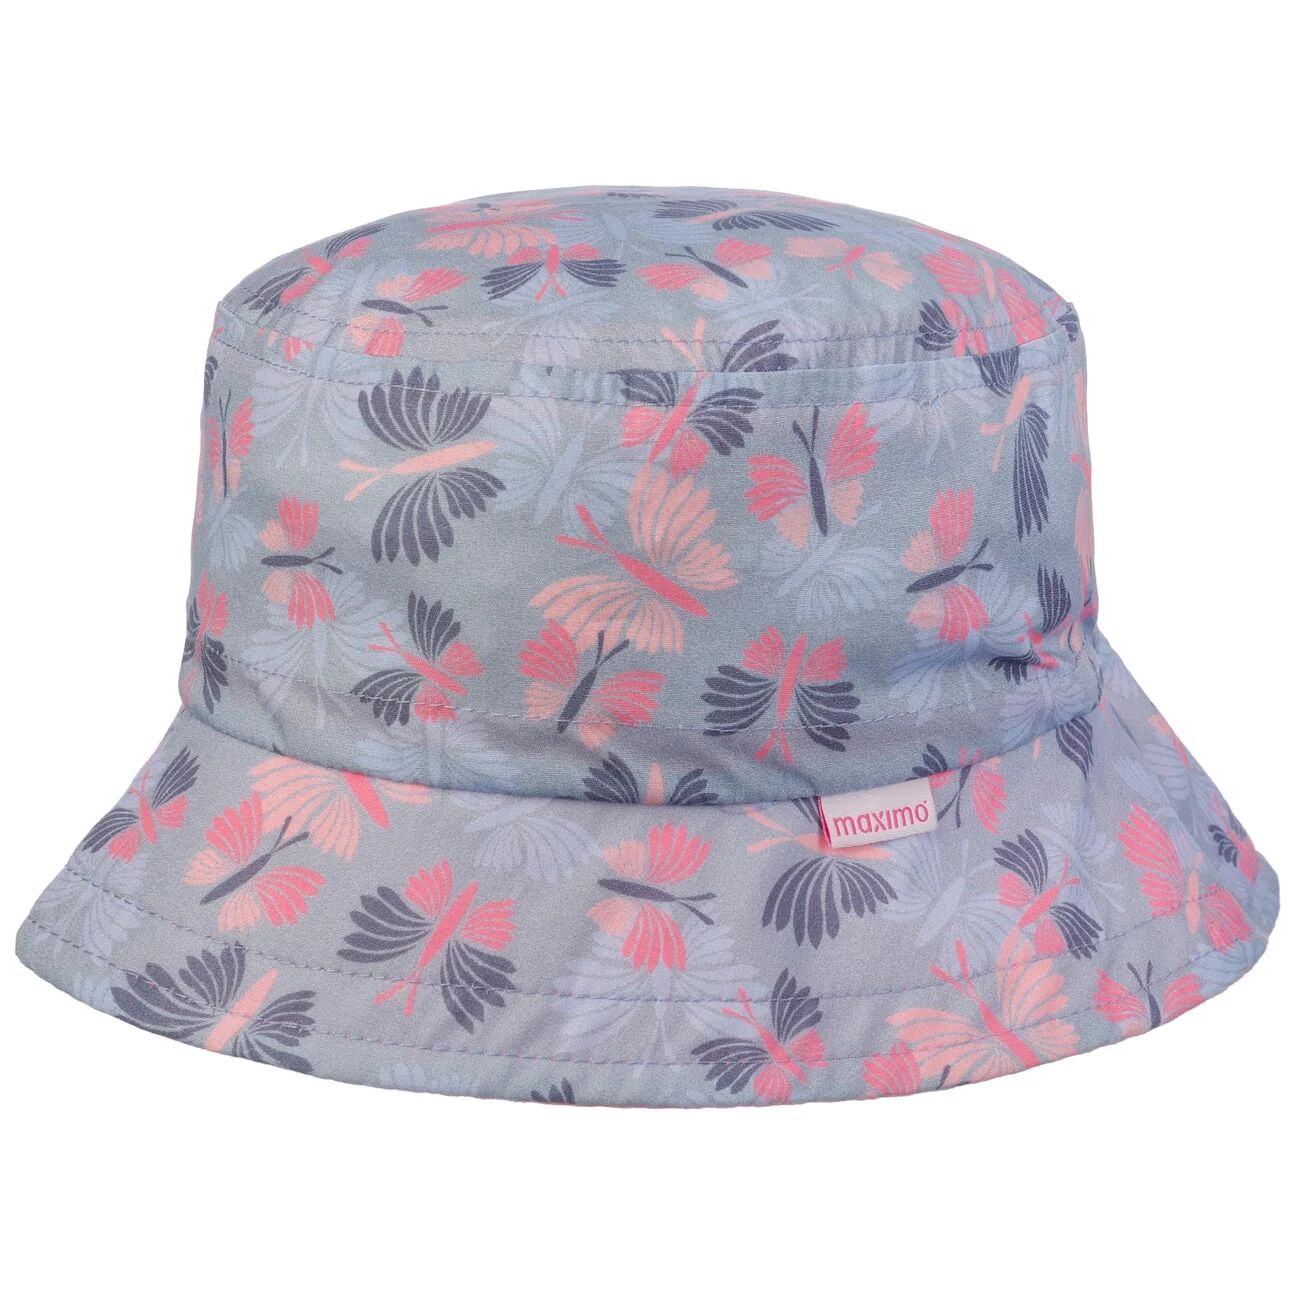 Tricolour Butterflies Girls Cloth Hat by maximo - navy-old rose - Size: 51 cm